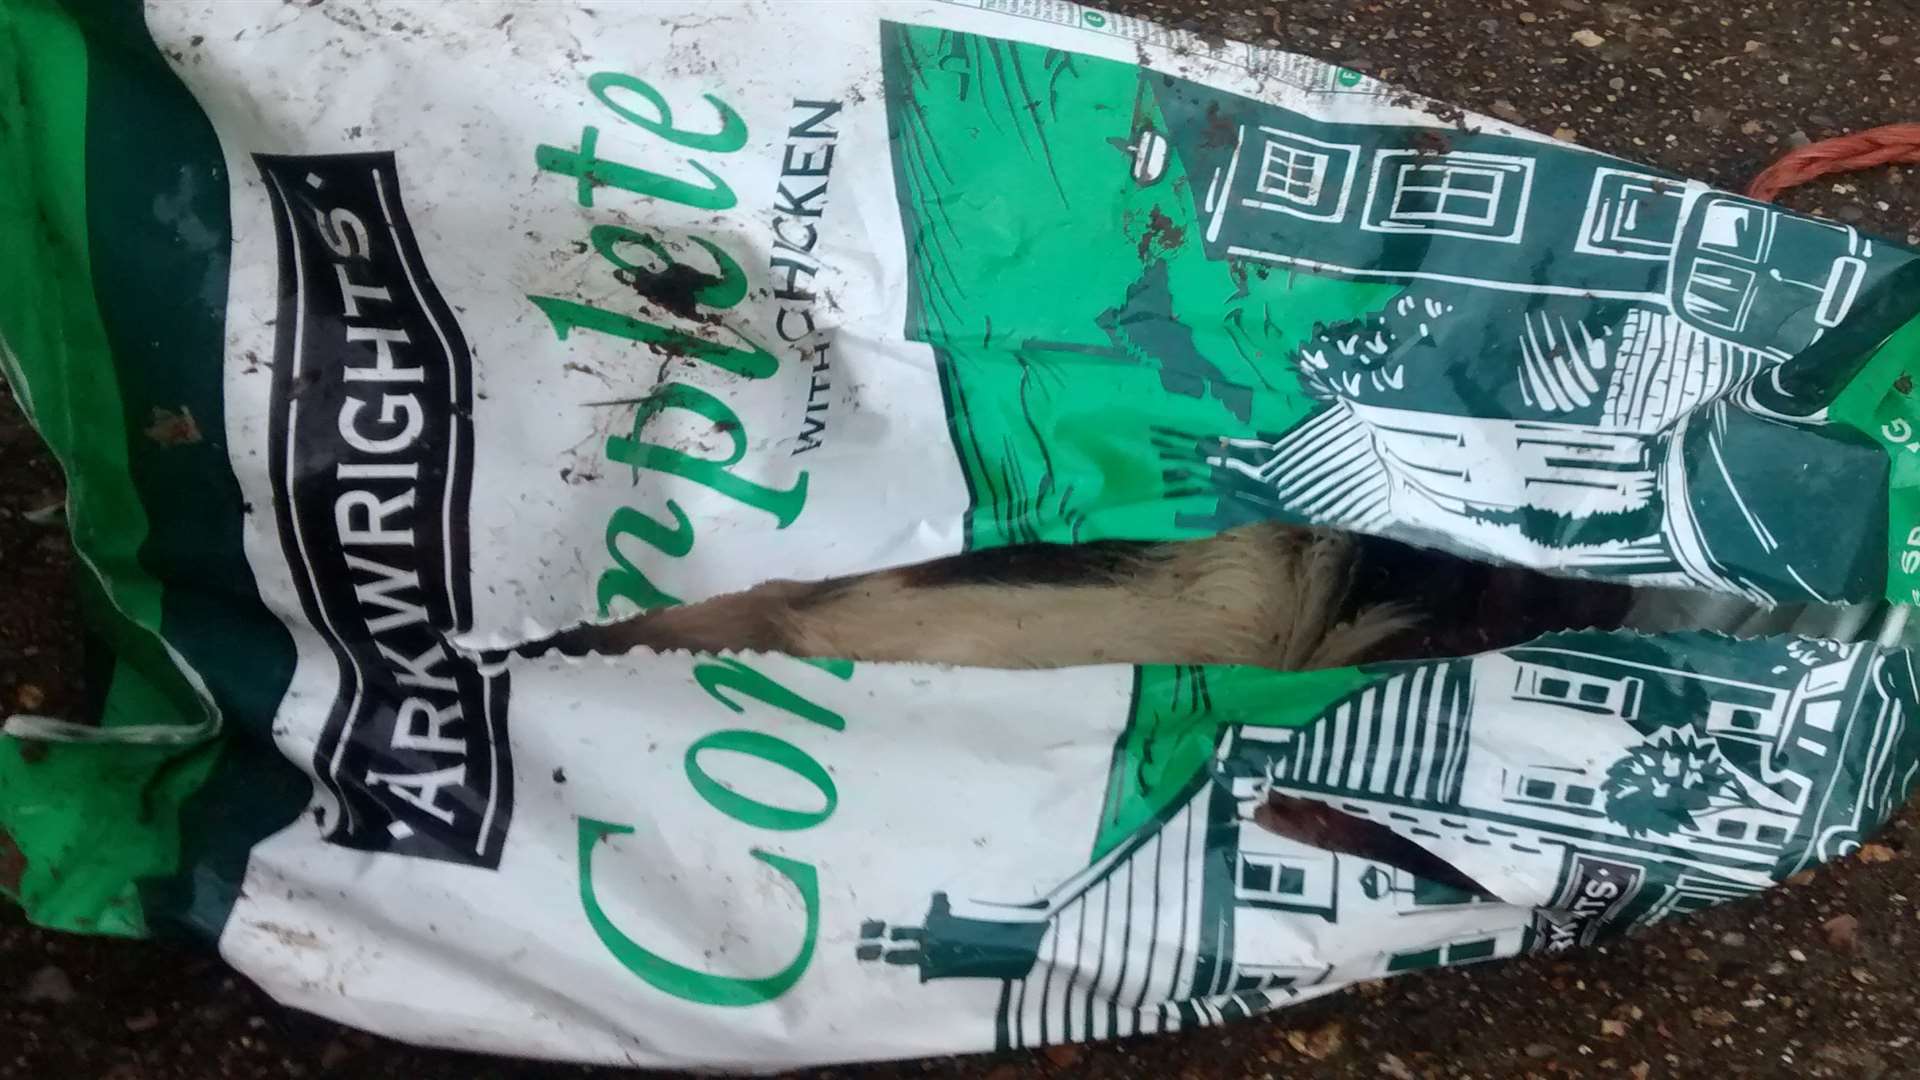 This dog was found dead in a pet food bag near Maidstone